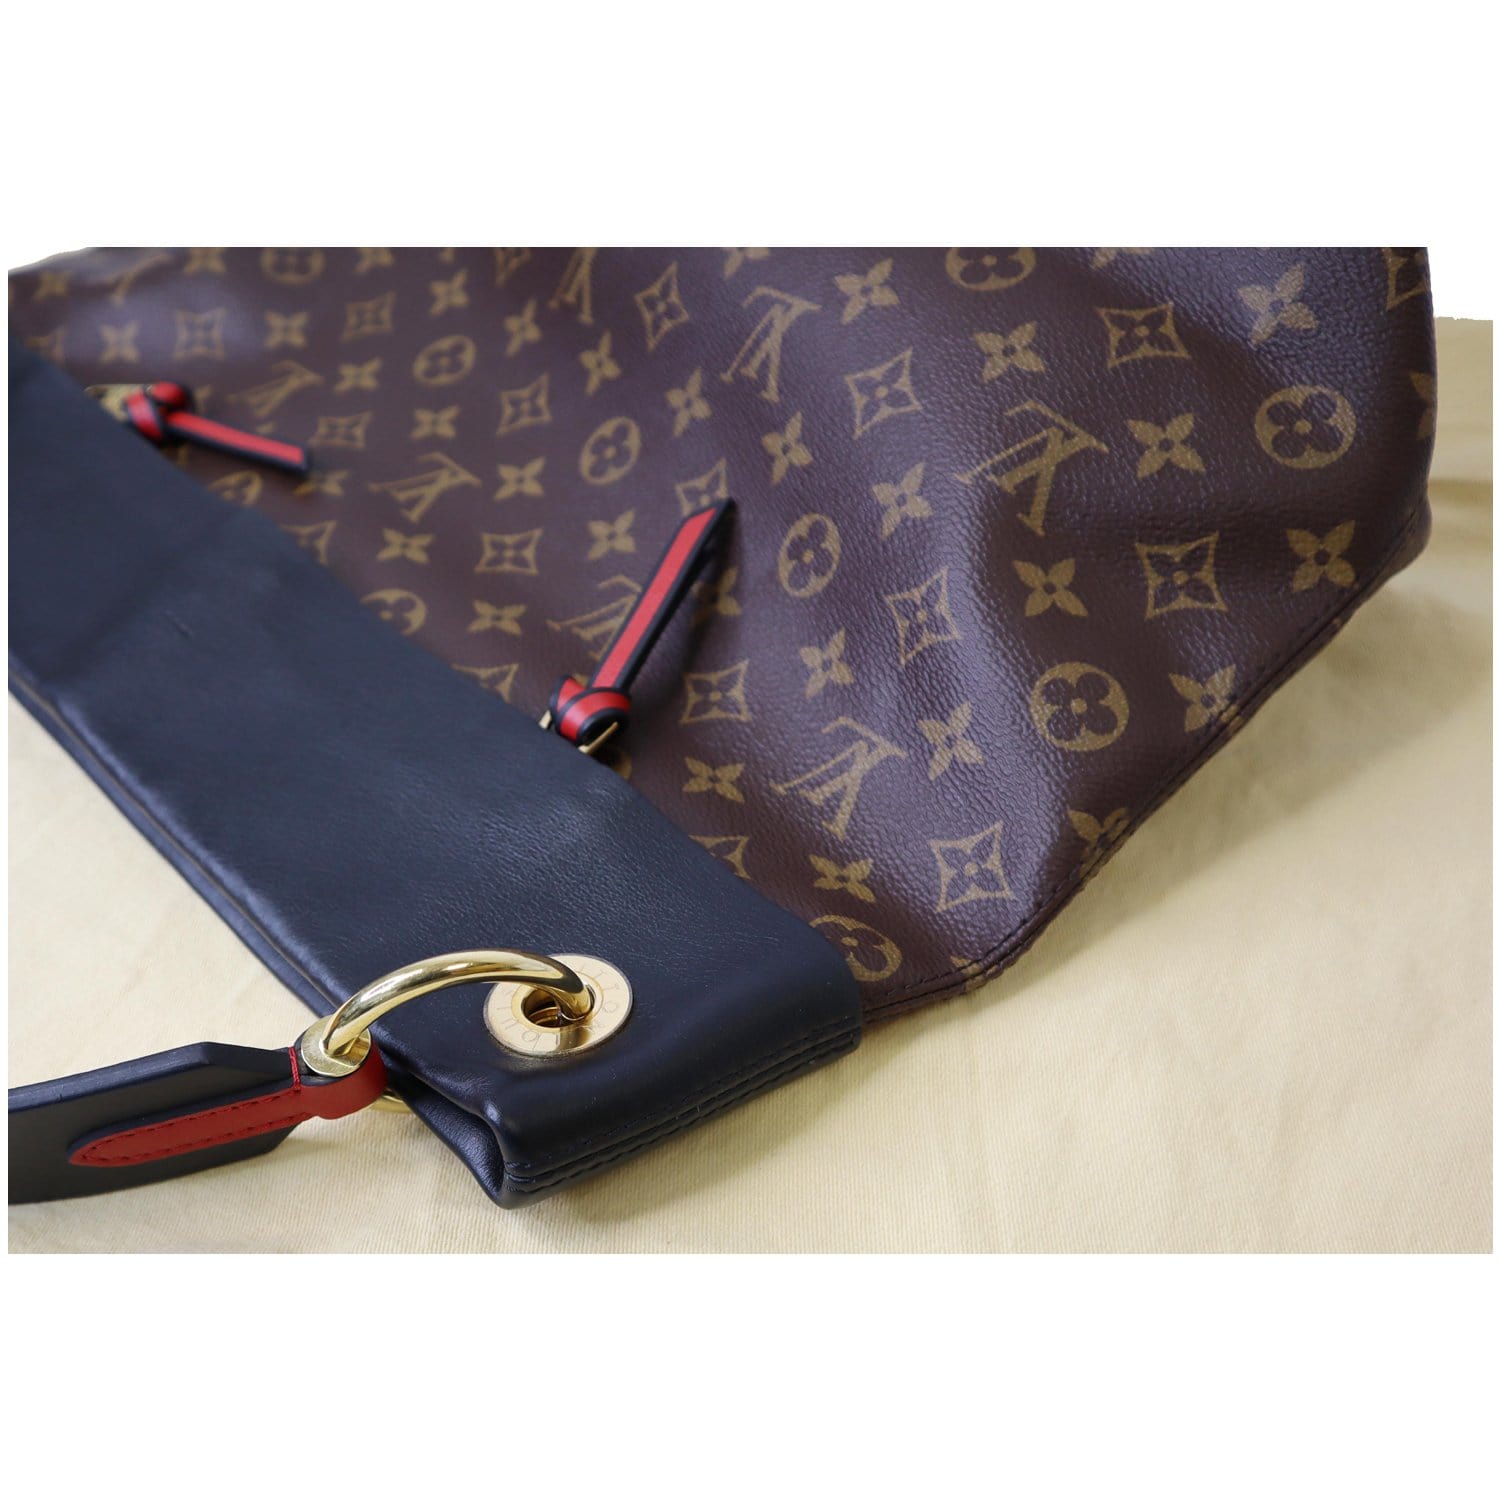 Louis Vuitton Tuileries Hobo Monogram Canvas with Leather Brown 2402171